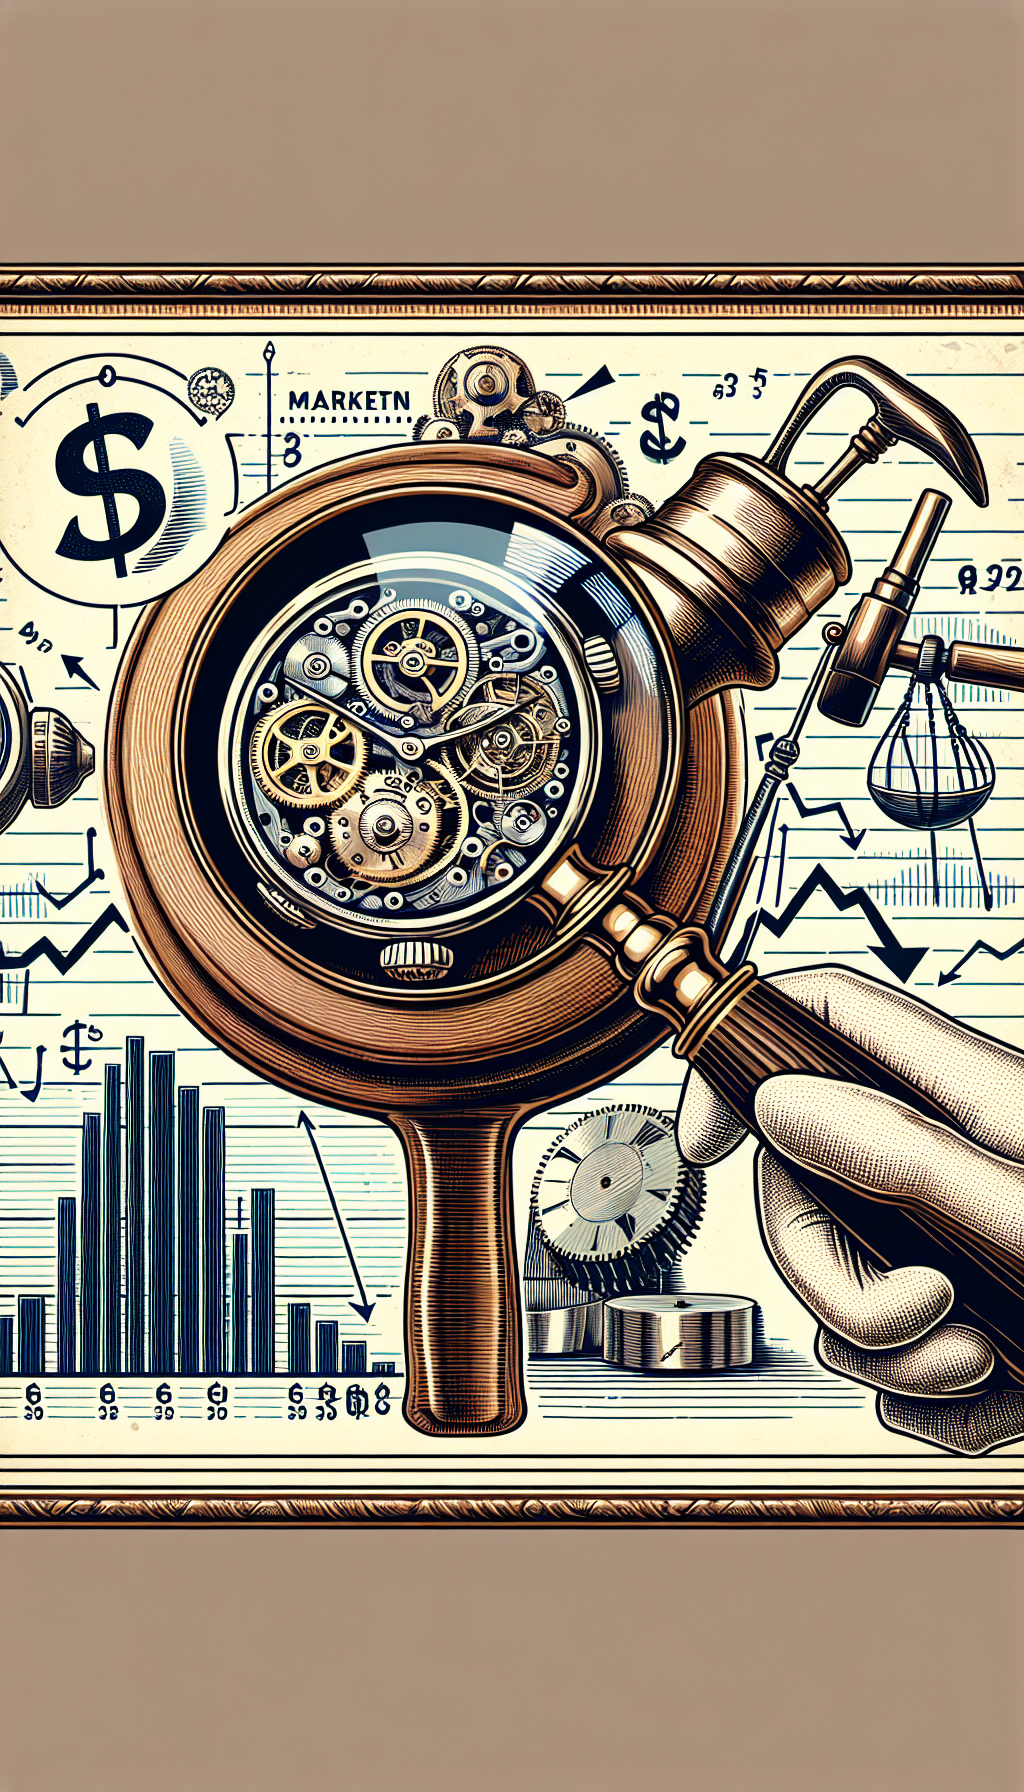 An illustration showcases a pristine Lady Elgin watch magnified under a classic jeweler's loupe against a backdrop of ascending graph lines and dollar signs, symbolizing market trends and valuation. Vintage clock gears and an auction hammer subtly frame the scene, reflecting the intricate value tied to antique timepieces.